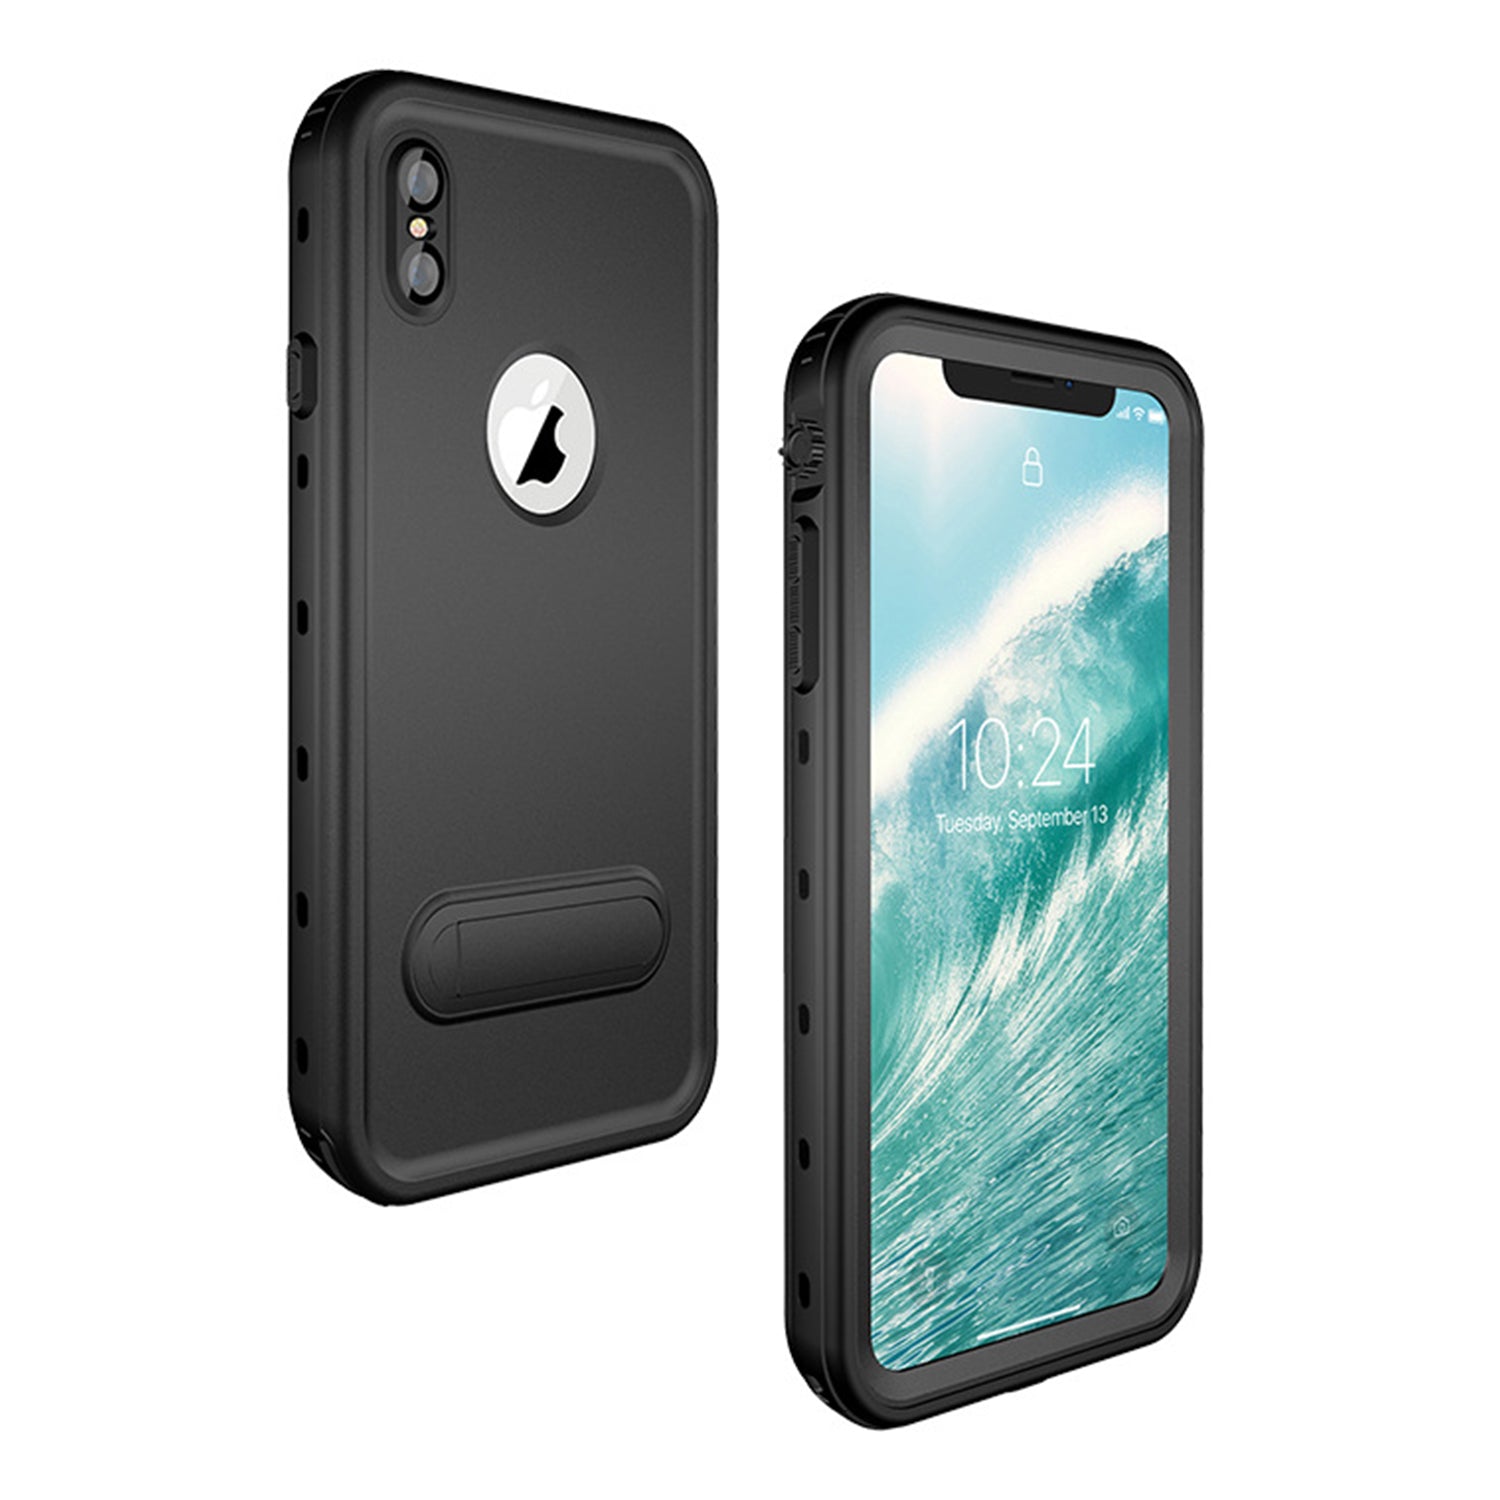 Apple iPhone Xs Max (6.5") 360 Full Protective Waterproof Case with Built-in Screen Fingerprint Protector